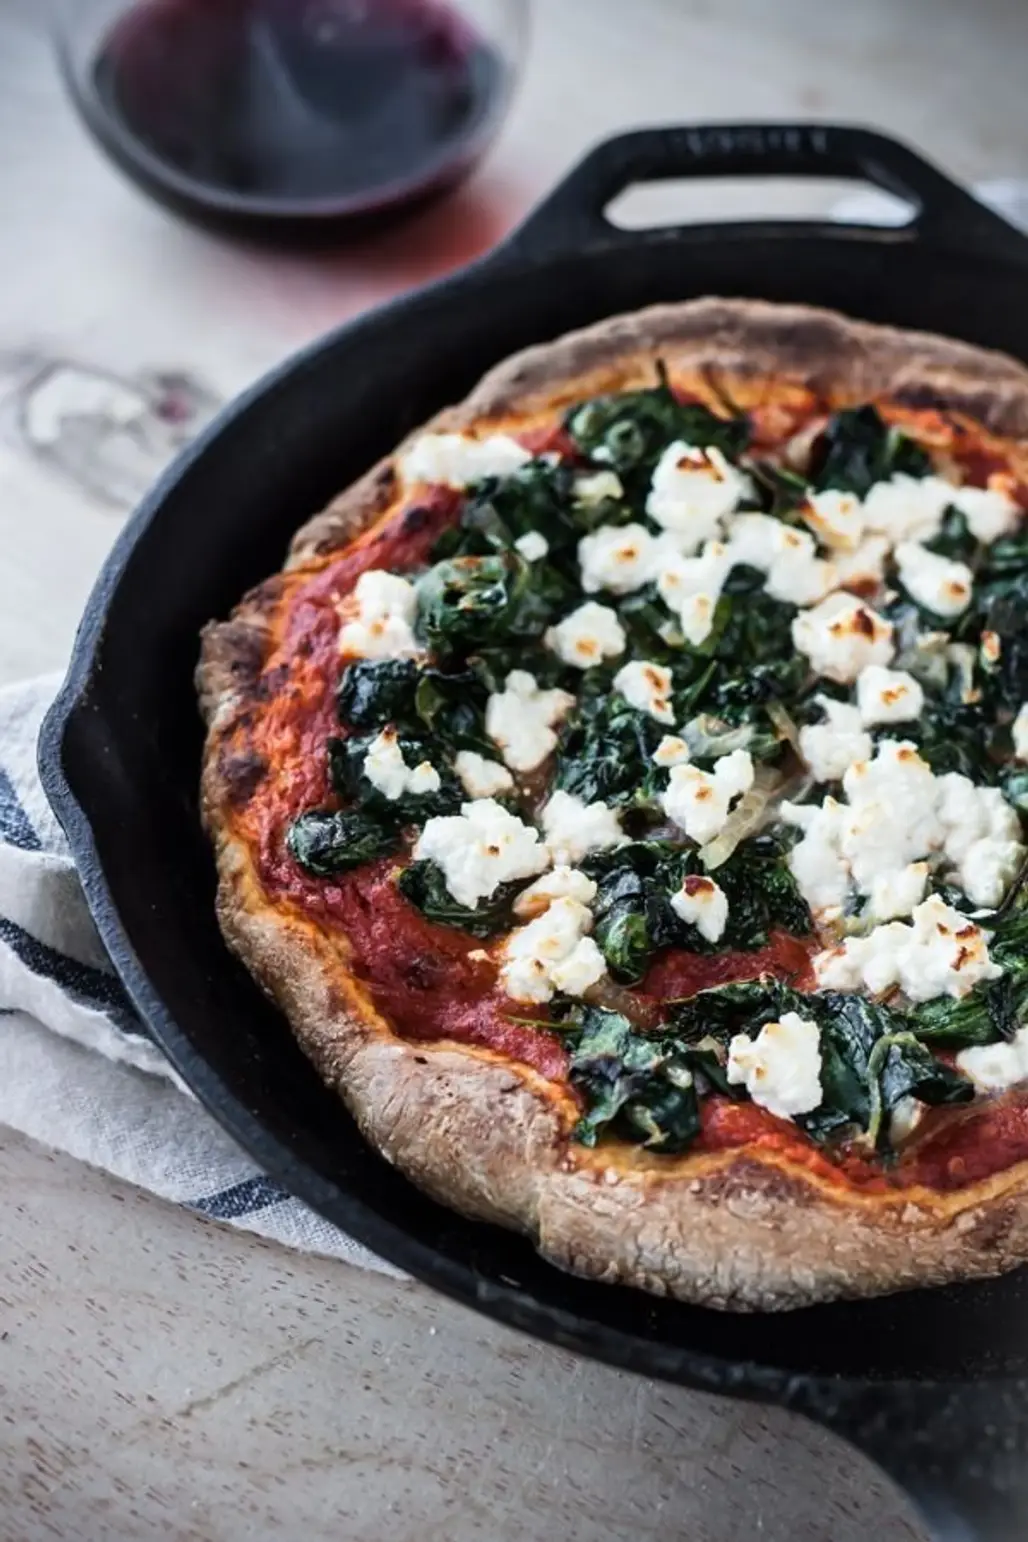 Spicy Harissa, Spinach and Feta Skillet Pizza